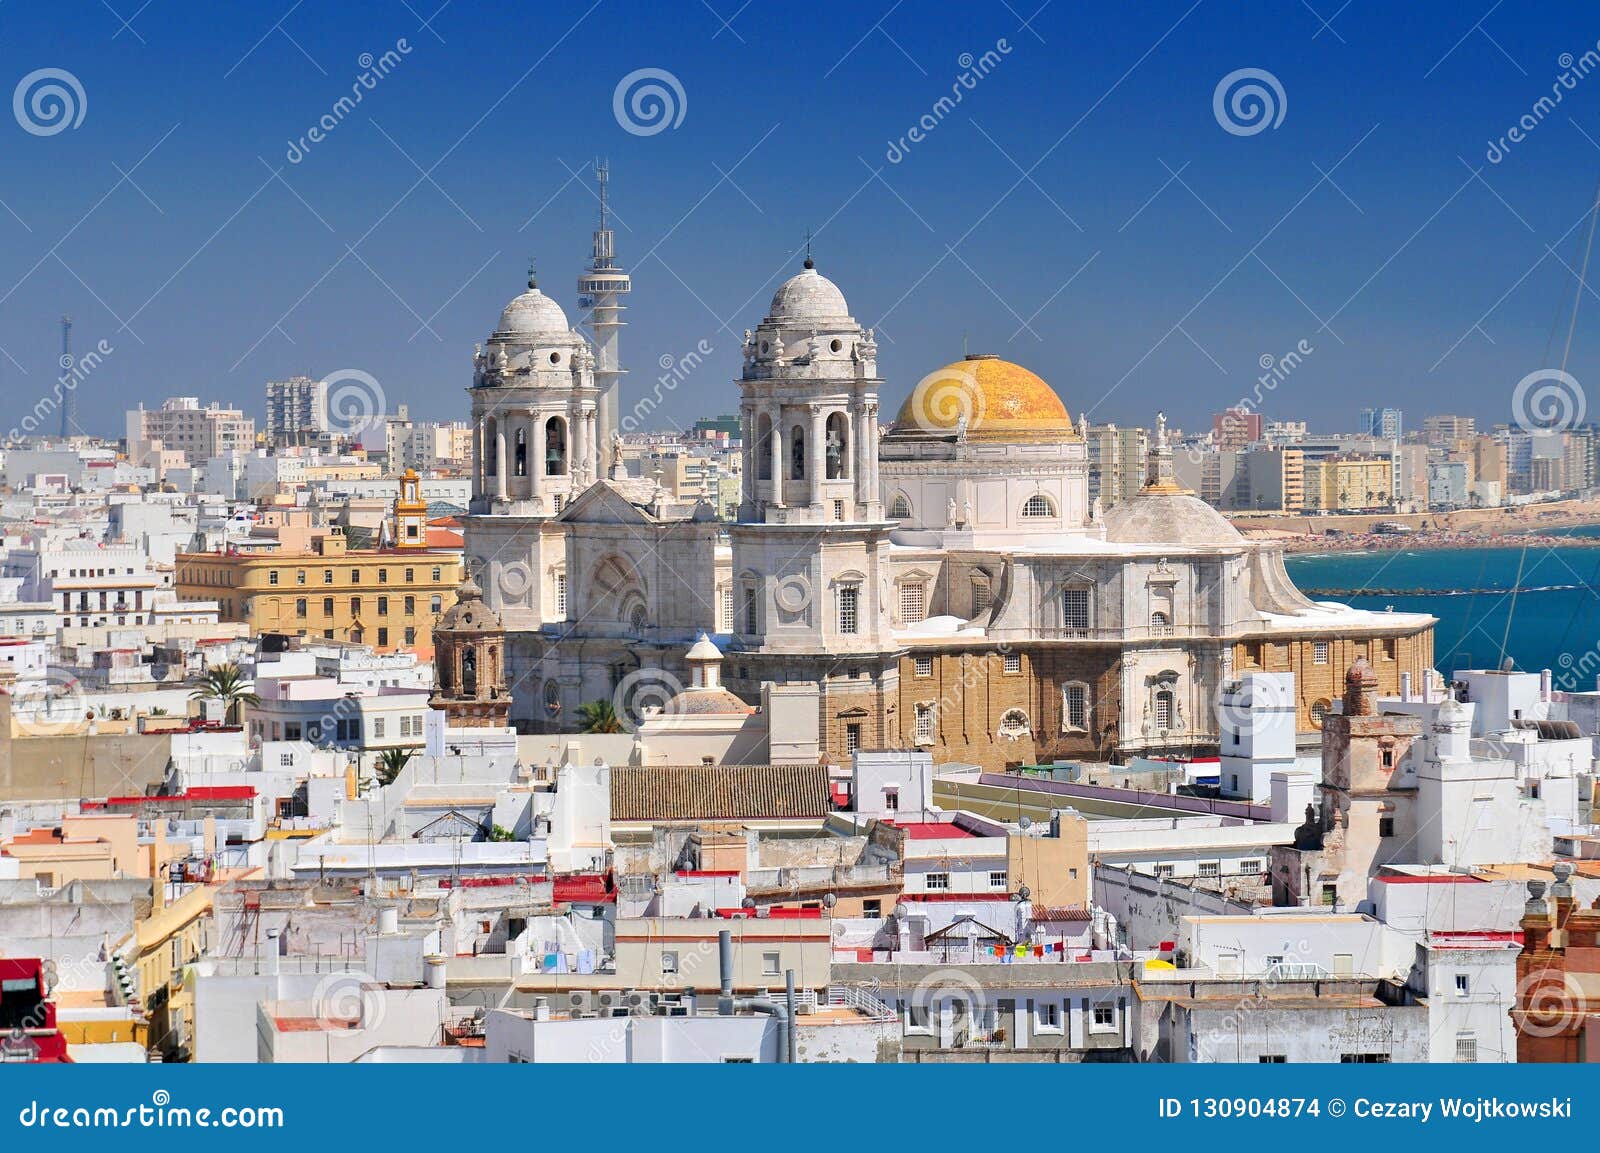 view from torre tavira tower to cadiz cathedral, also new cathedral, costa de la luz, andalusia, spain.